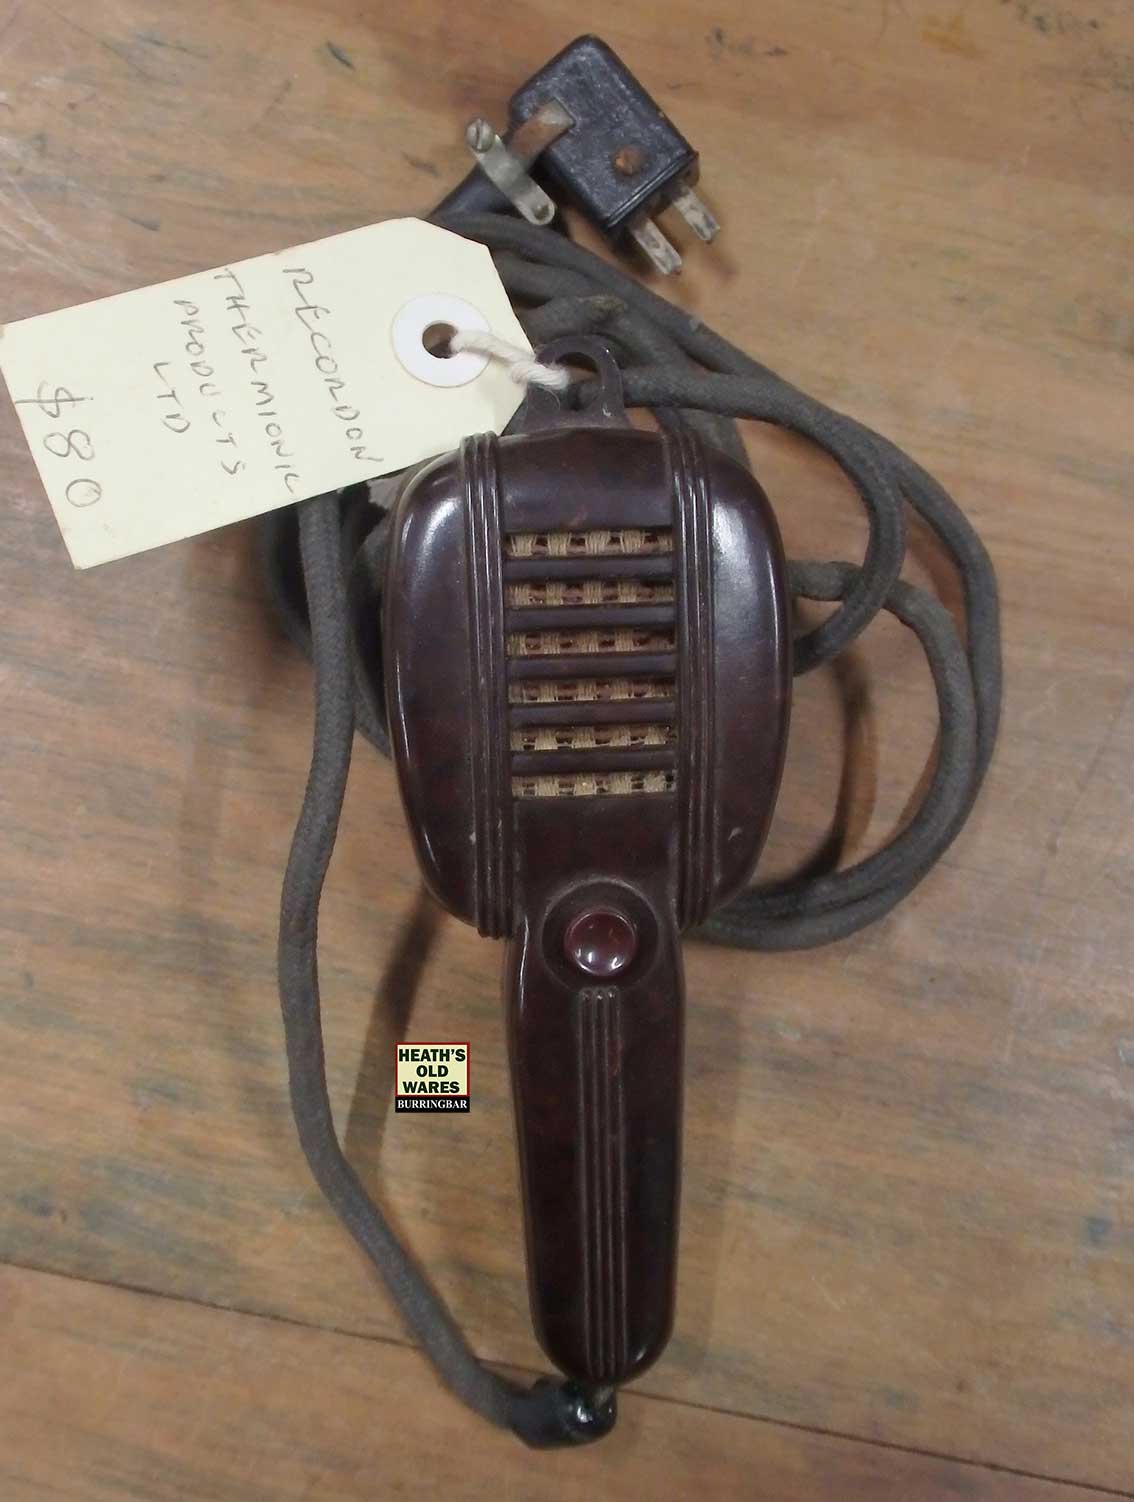 Antique bakelite recordon thermionic microphone for sale at Heaths Old Wares, Collectables, Antiques & Industrial Antiques, 19-21 Broadway, Burringbar NSW 2483 Ph 0266771181 open 7 days